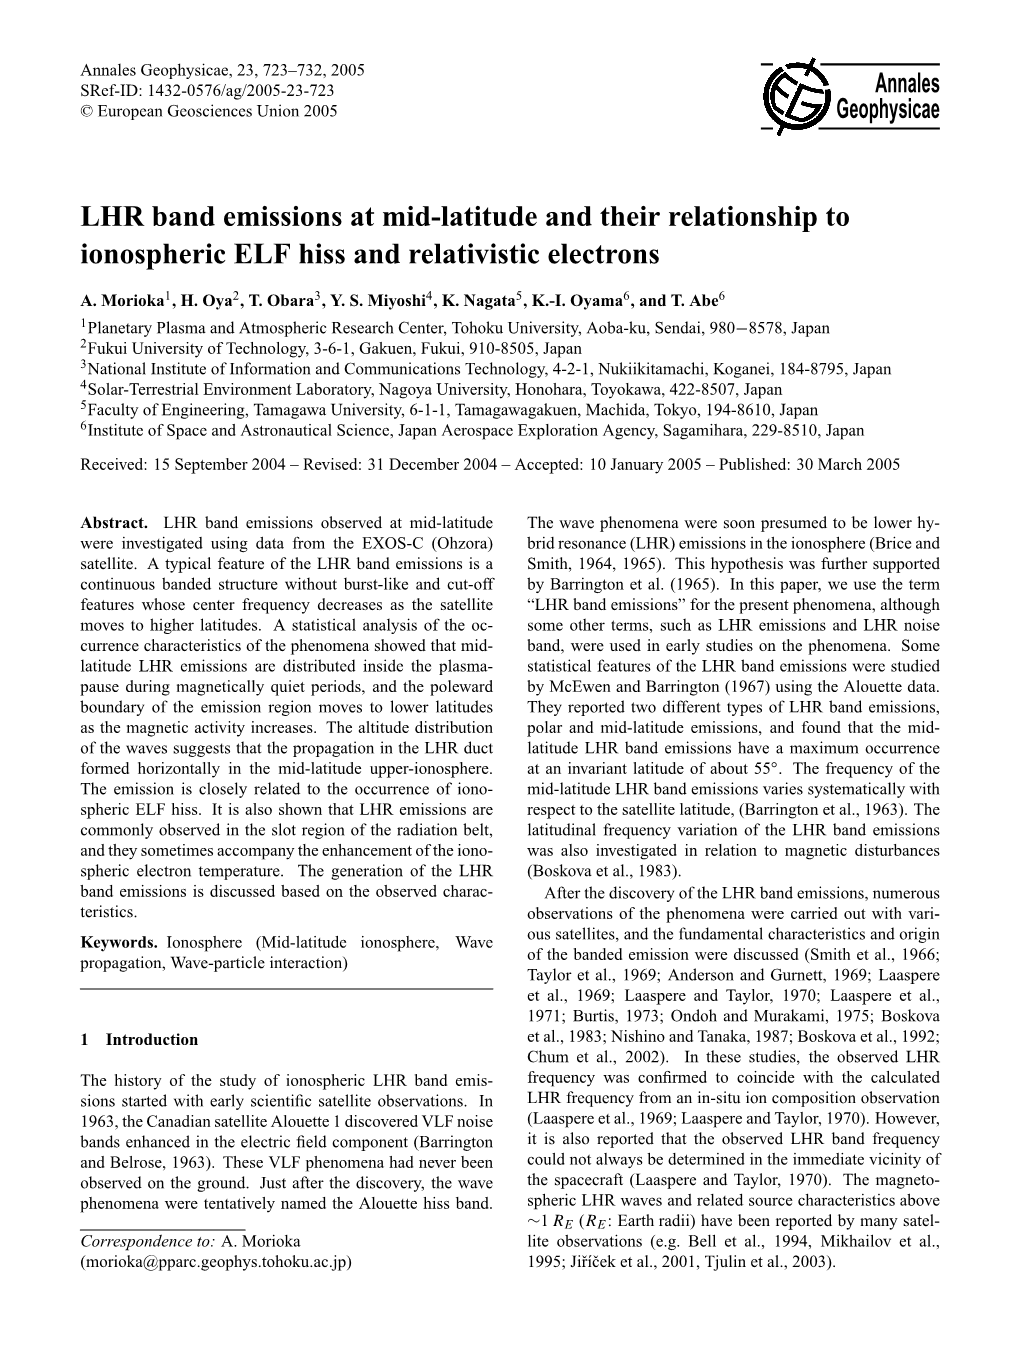 LHR Band Emissions at Mid-Latitude and Their Relationship to Ionospheric ELF Hiss and Relativistic Electrons